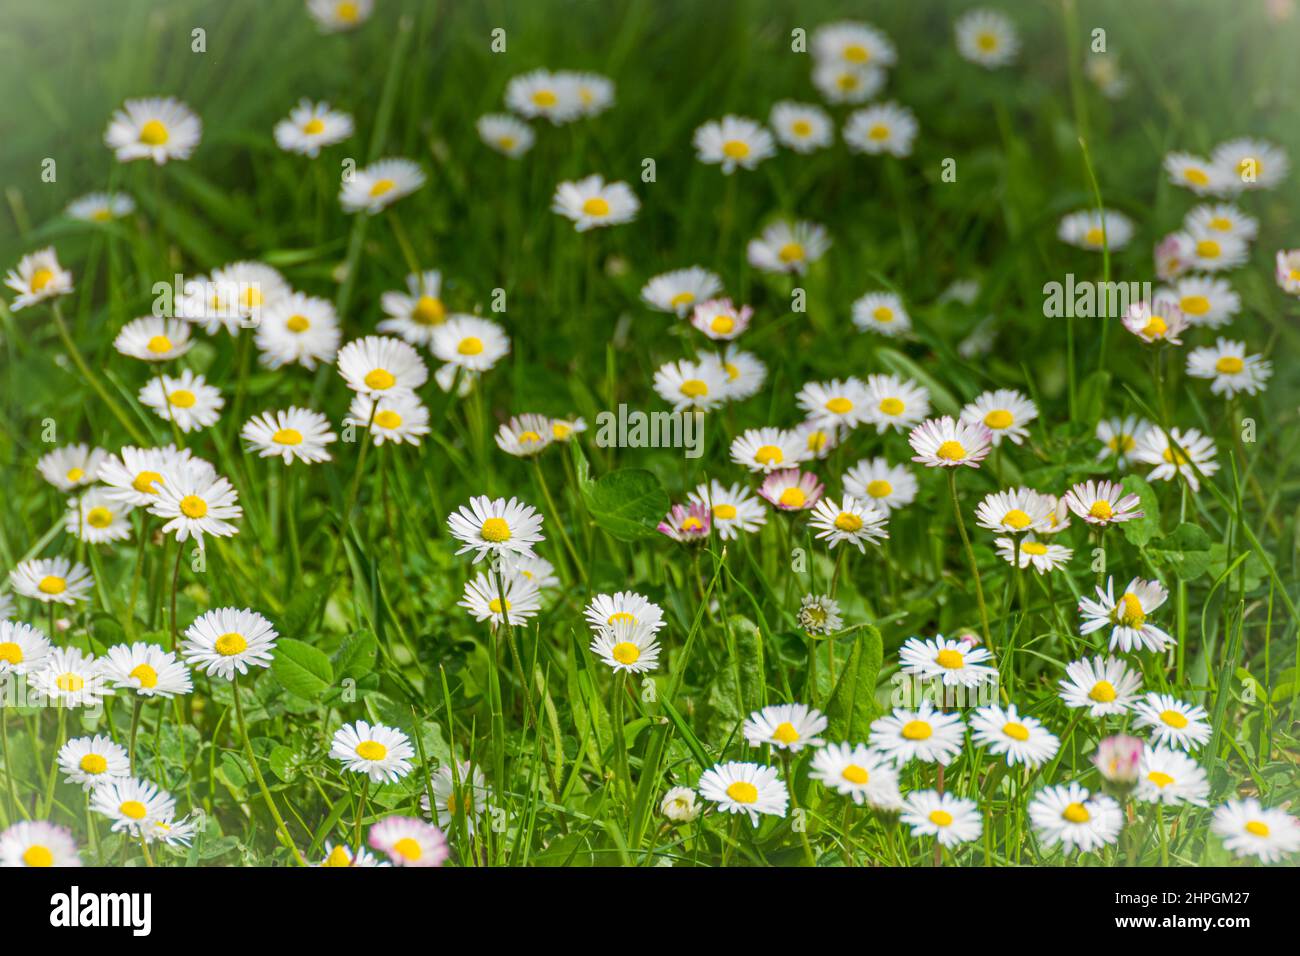 Close view of the ground of a garden with green grass and daisies in spring Bellis perennis Stock Photo